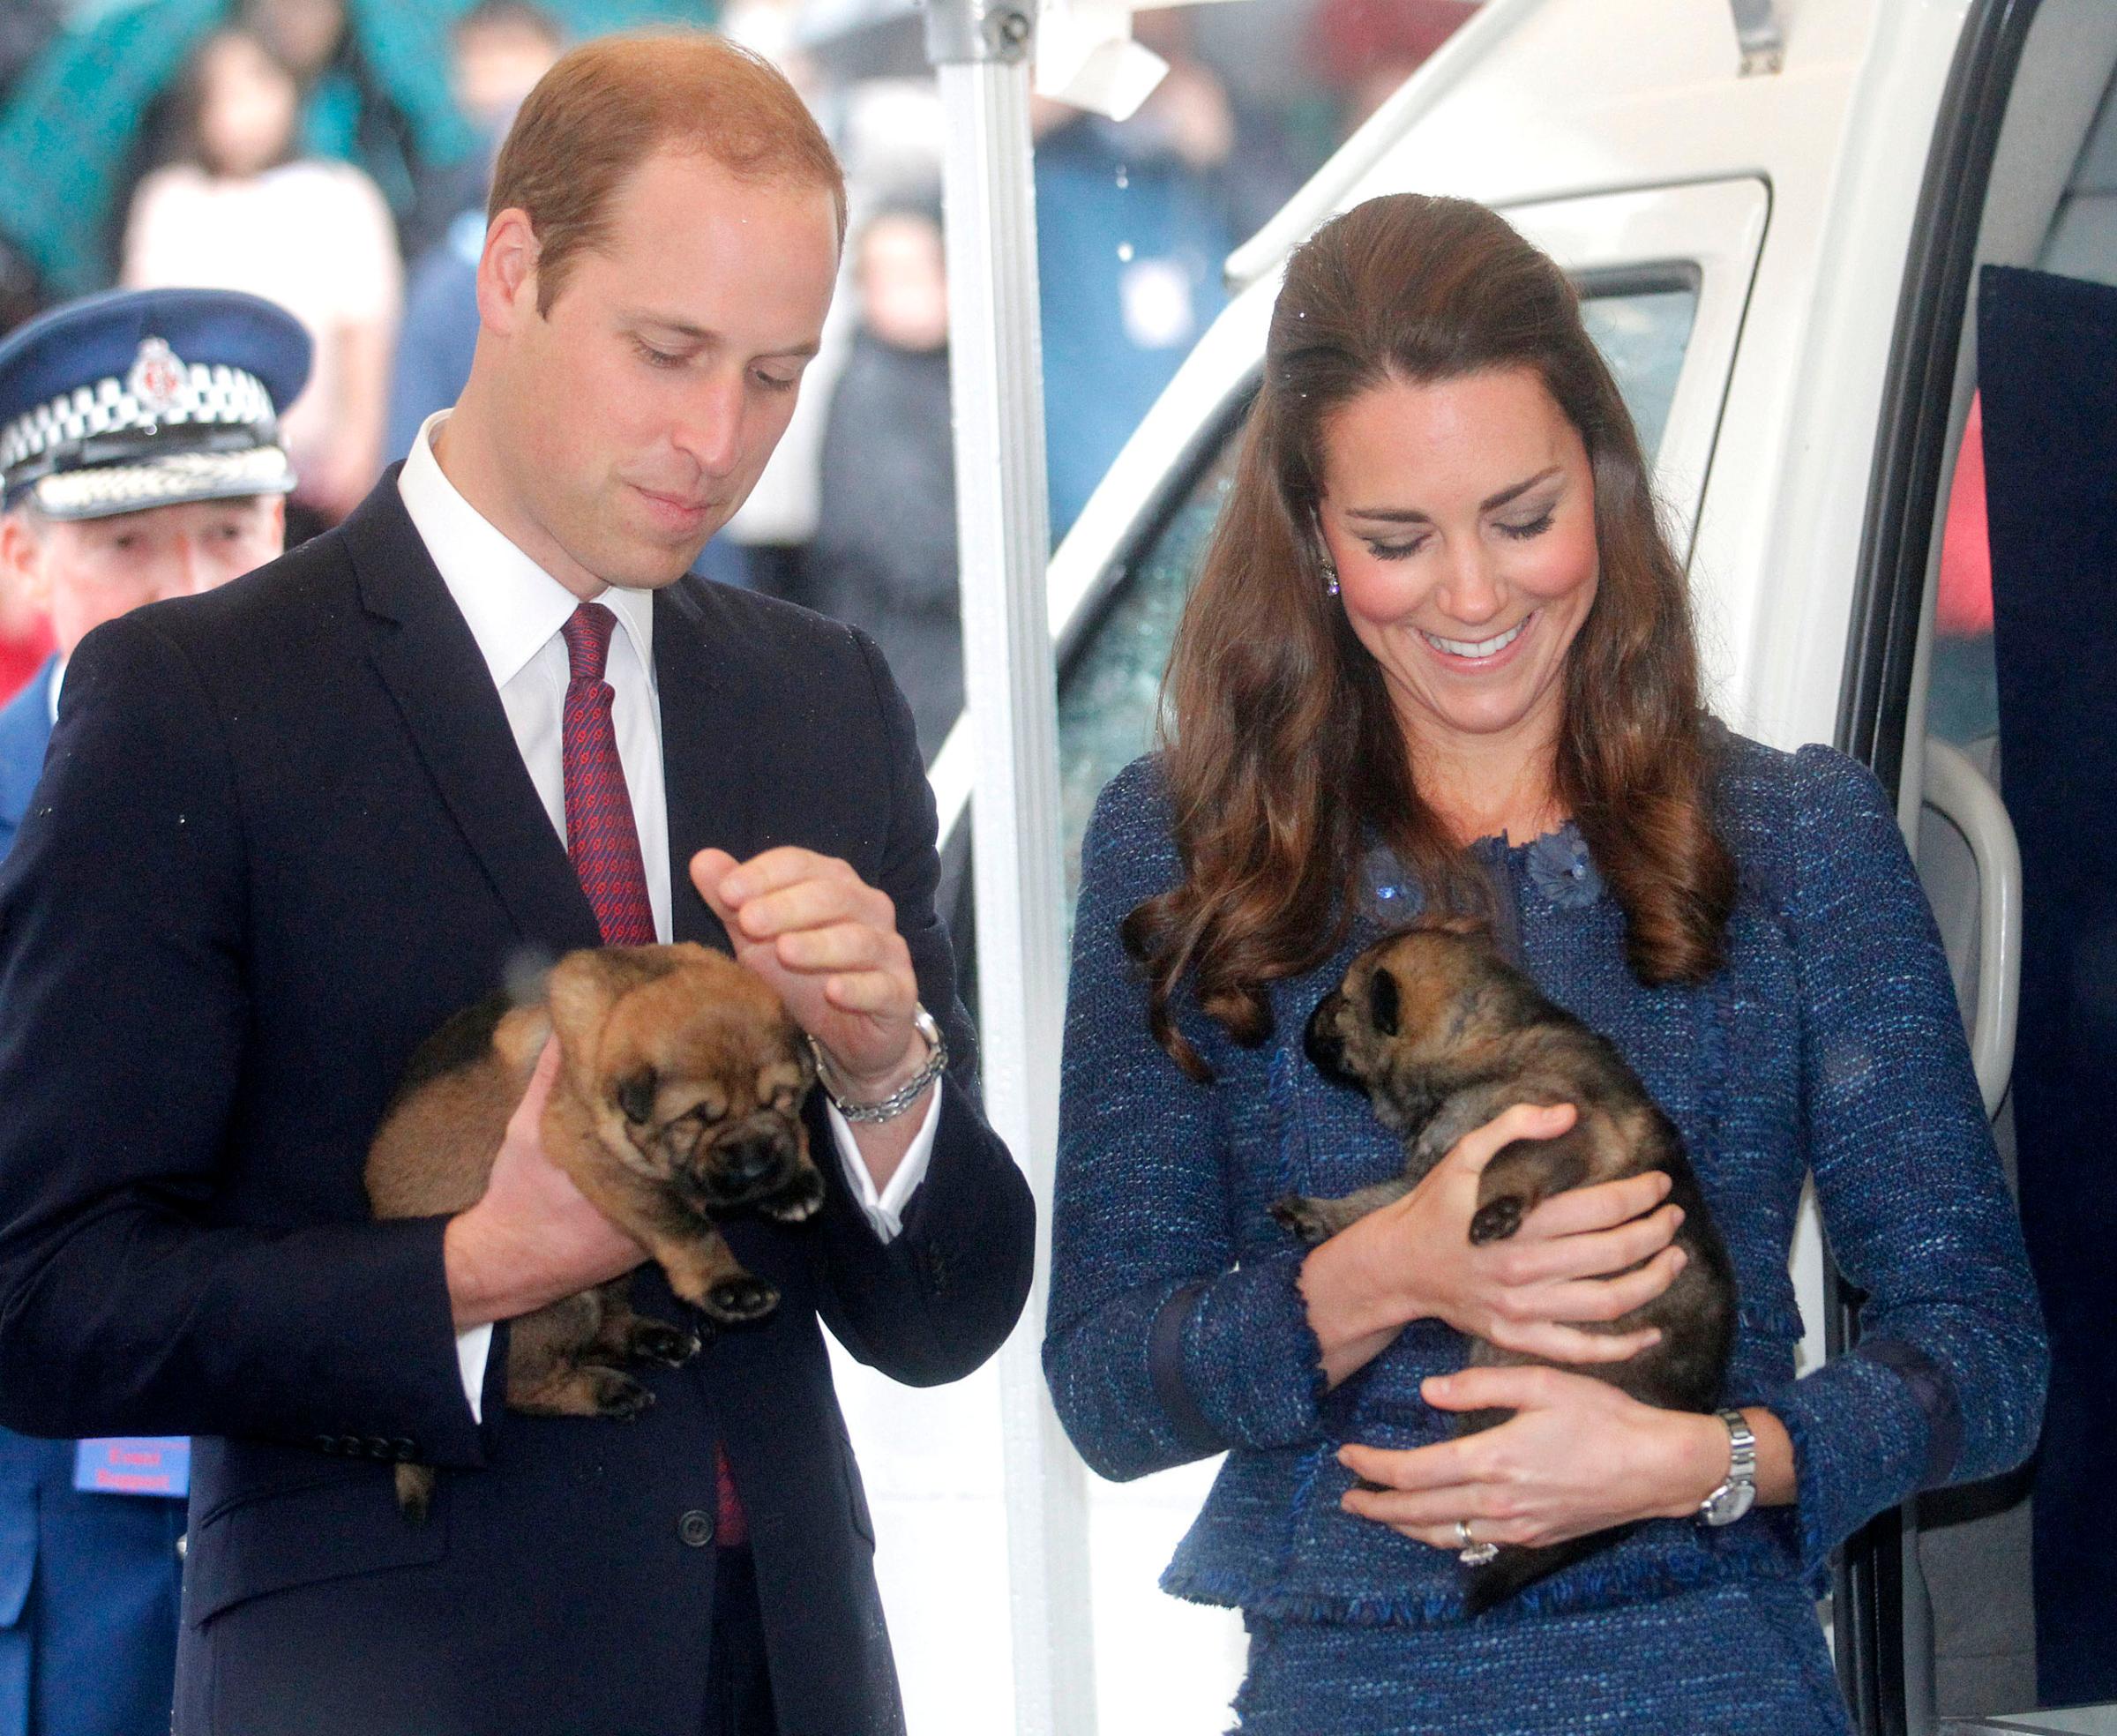 Prince William, Duke of Cambridge and Catherine, Duchess of Cambridge hold puppies during a visit to the Royal New Zealand Police College in Wellington, New Zealand on April 16, 2014.